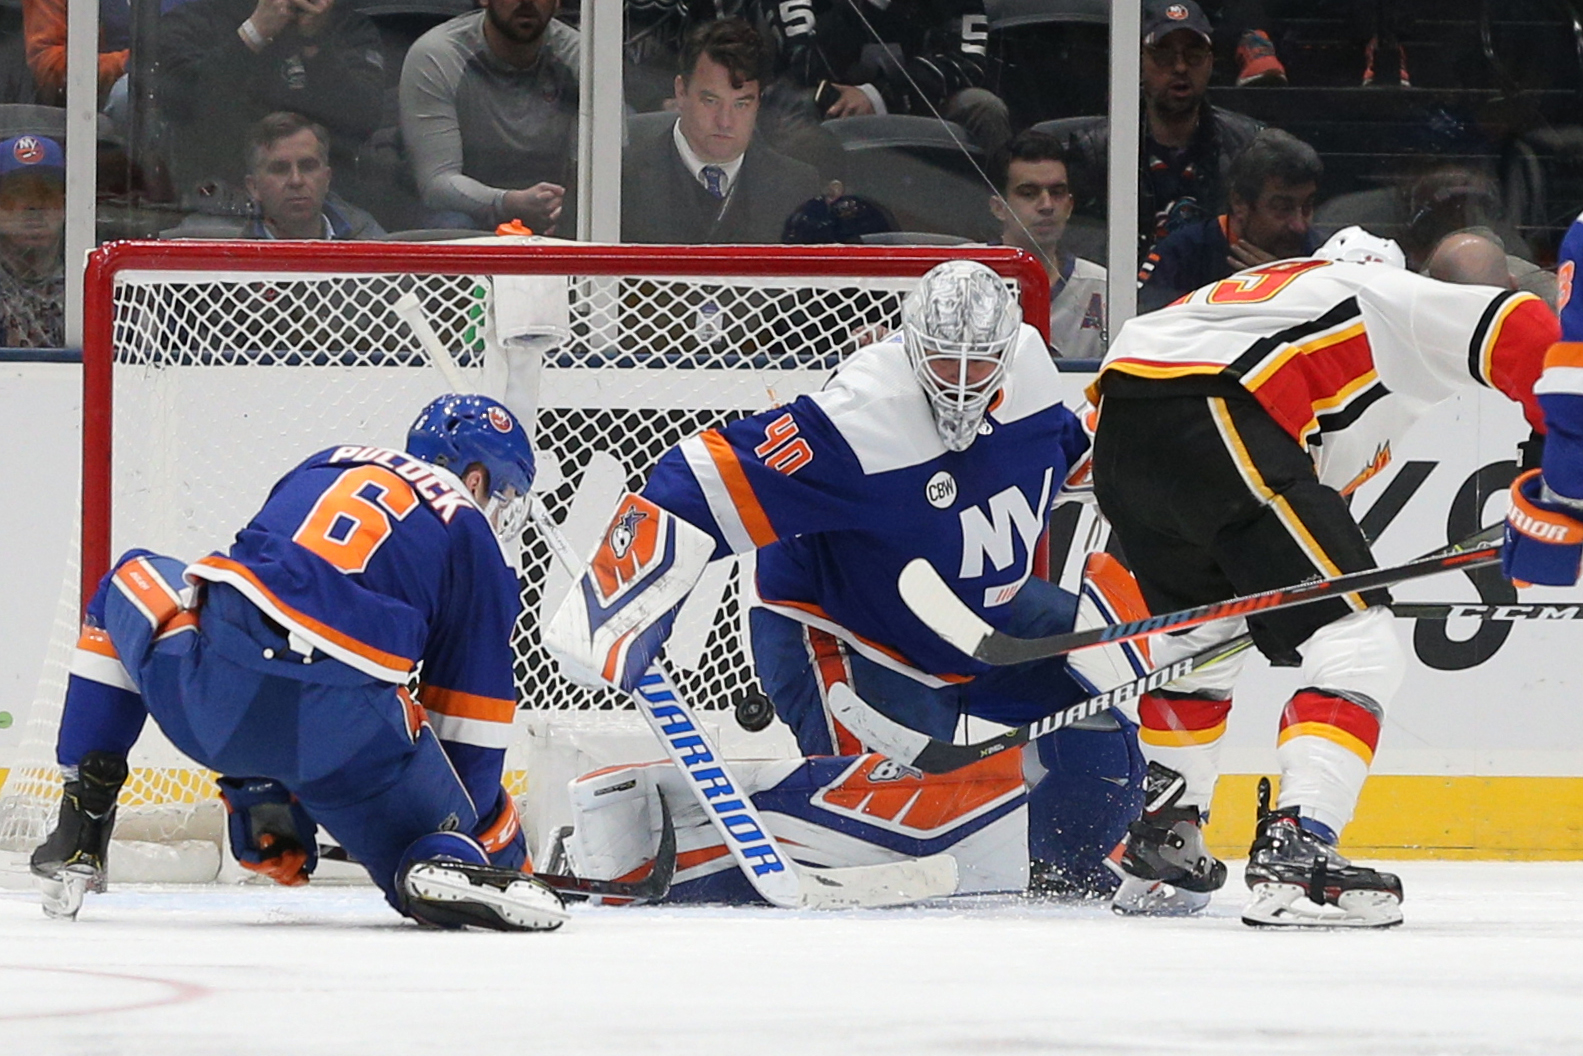 Feb 26, 2019; Uniondale, NY, USA; Calgary Flames left wing Matthew Tkachuk (19) scores a goal against New York Islanders goalie Robin Lehner (40) during the second period at Nassau Veterans Memorial Coliseum. Mandatory Credit: Brad Penner-USA TODAY Sports